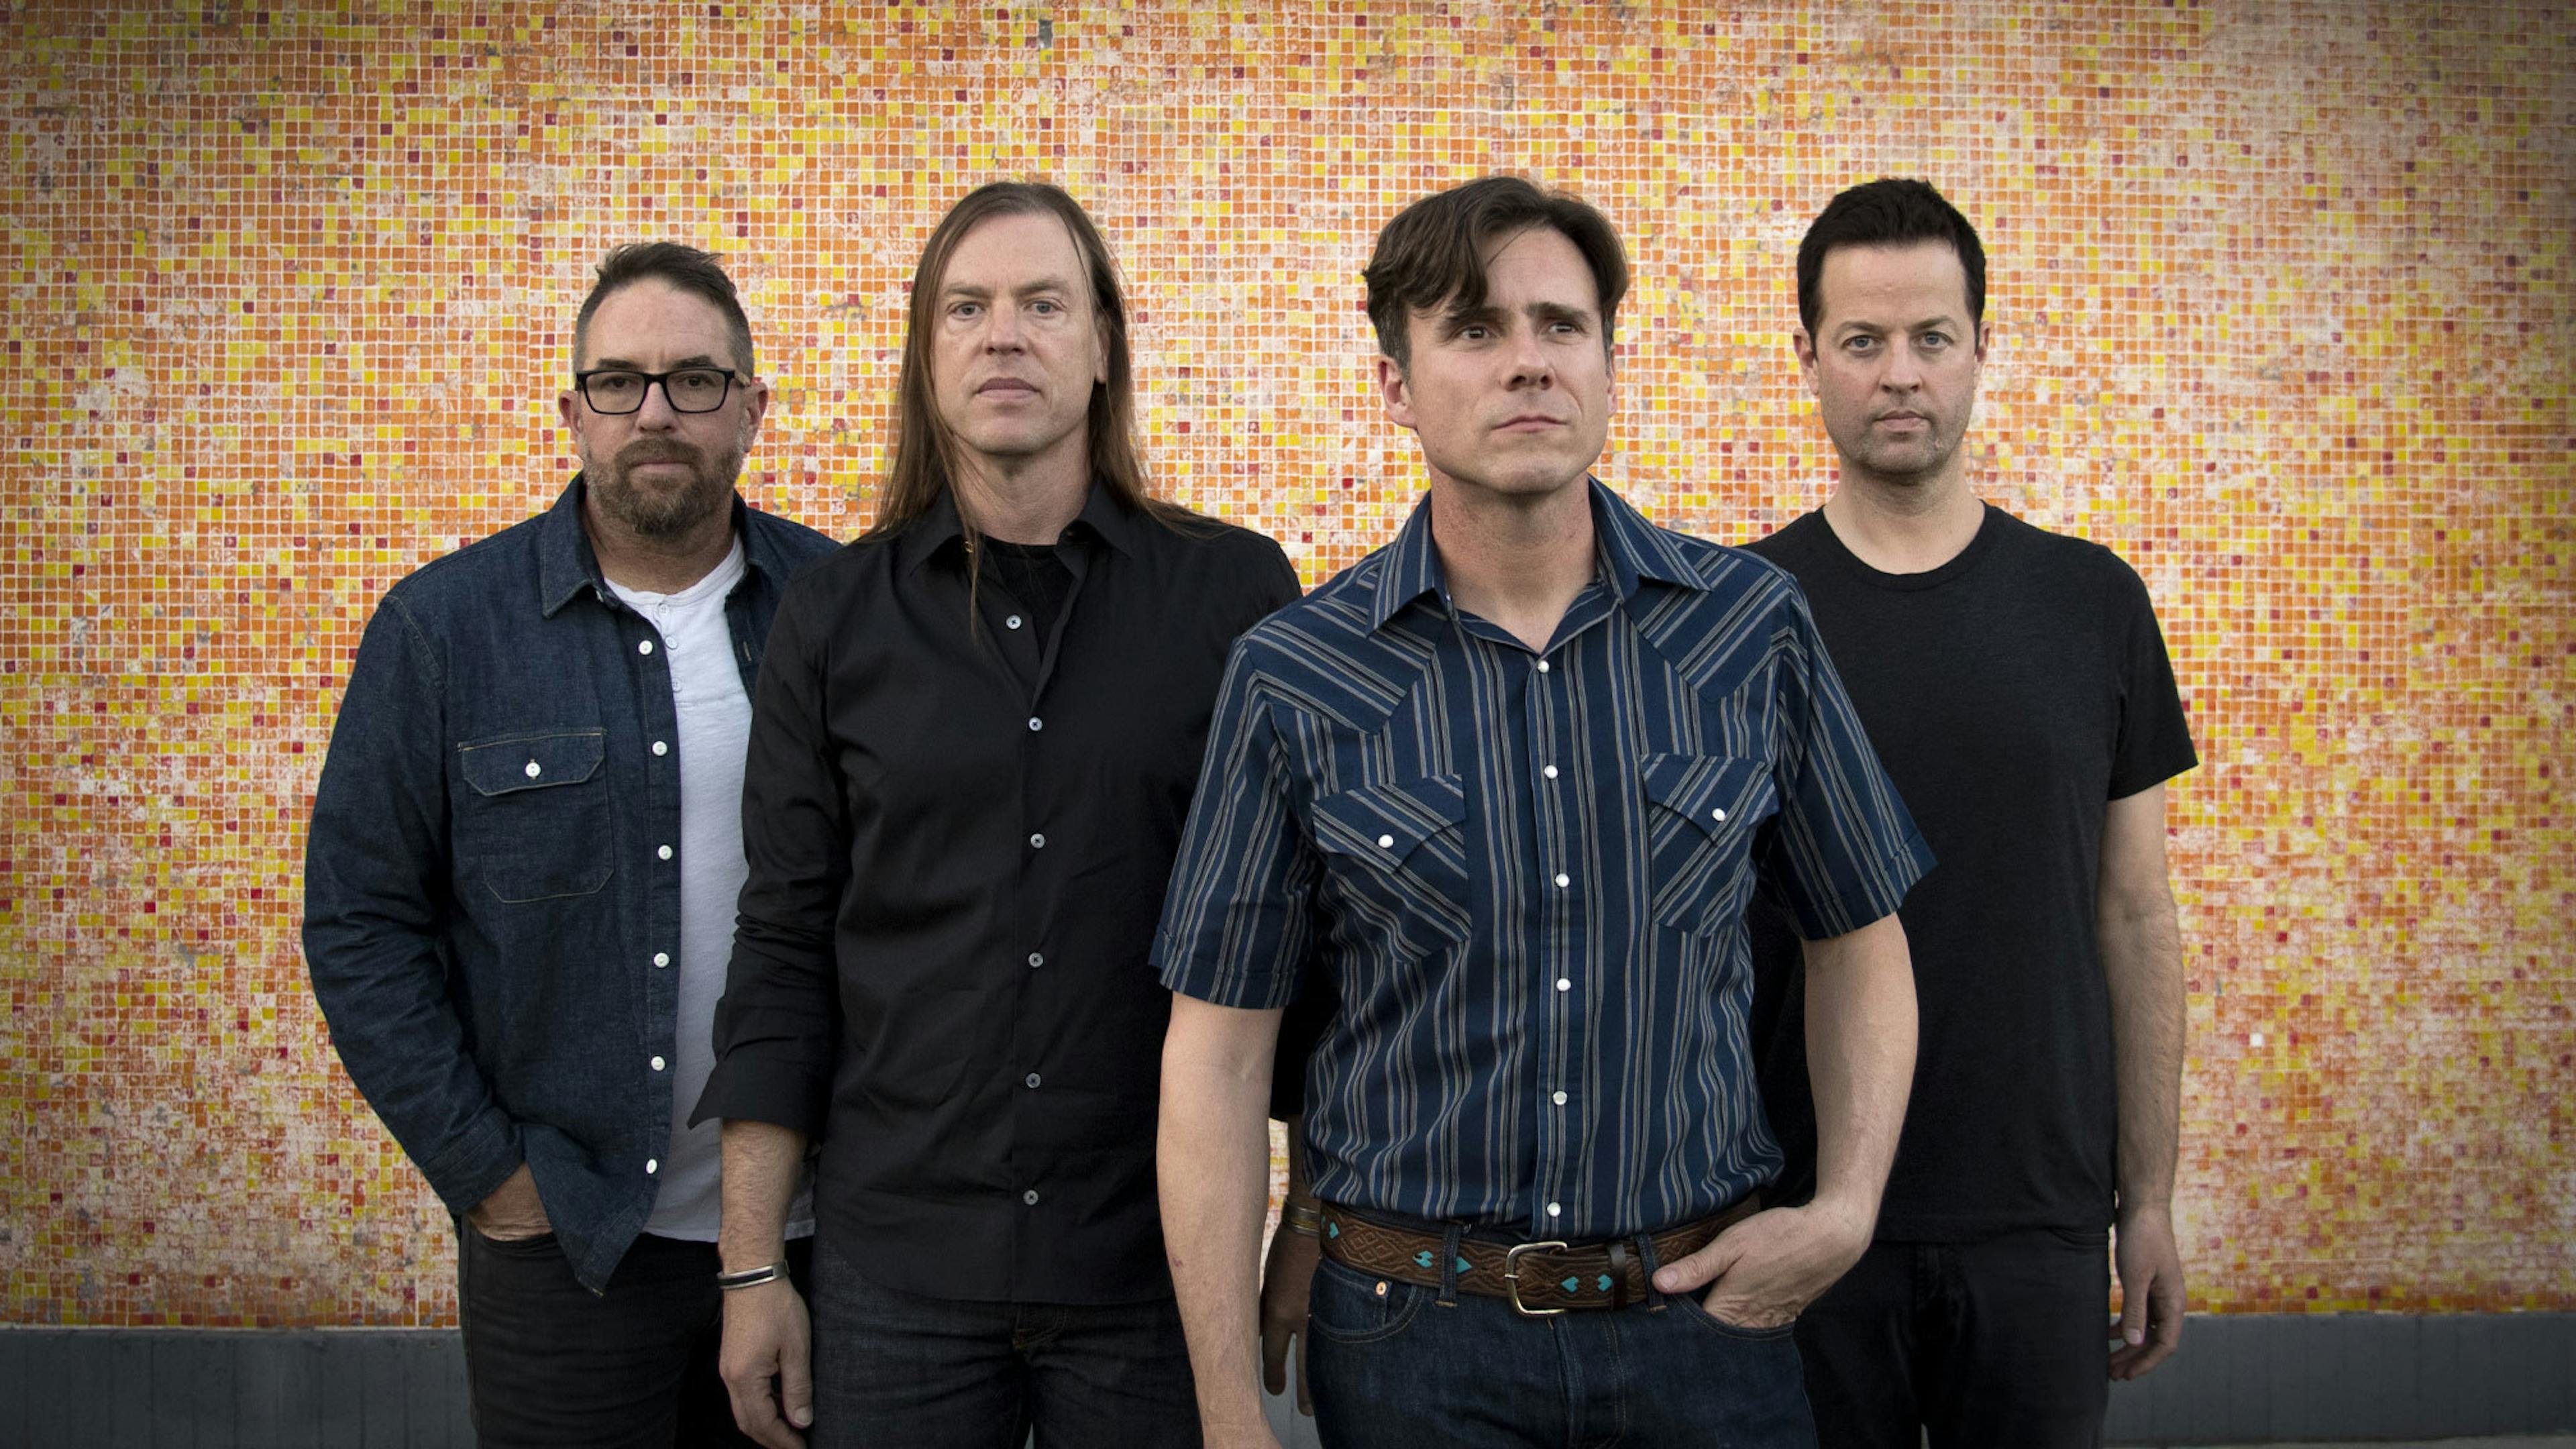 Listen to Jimmy Eat World’s new single, Place Your Debts